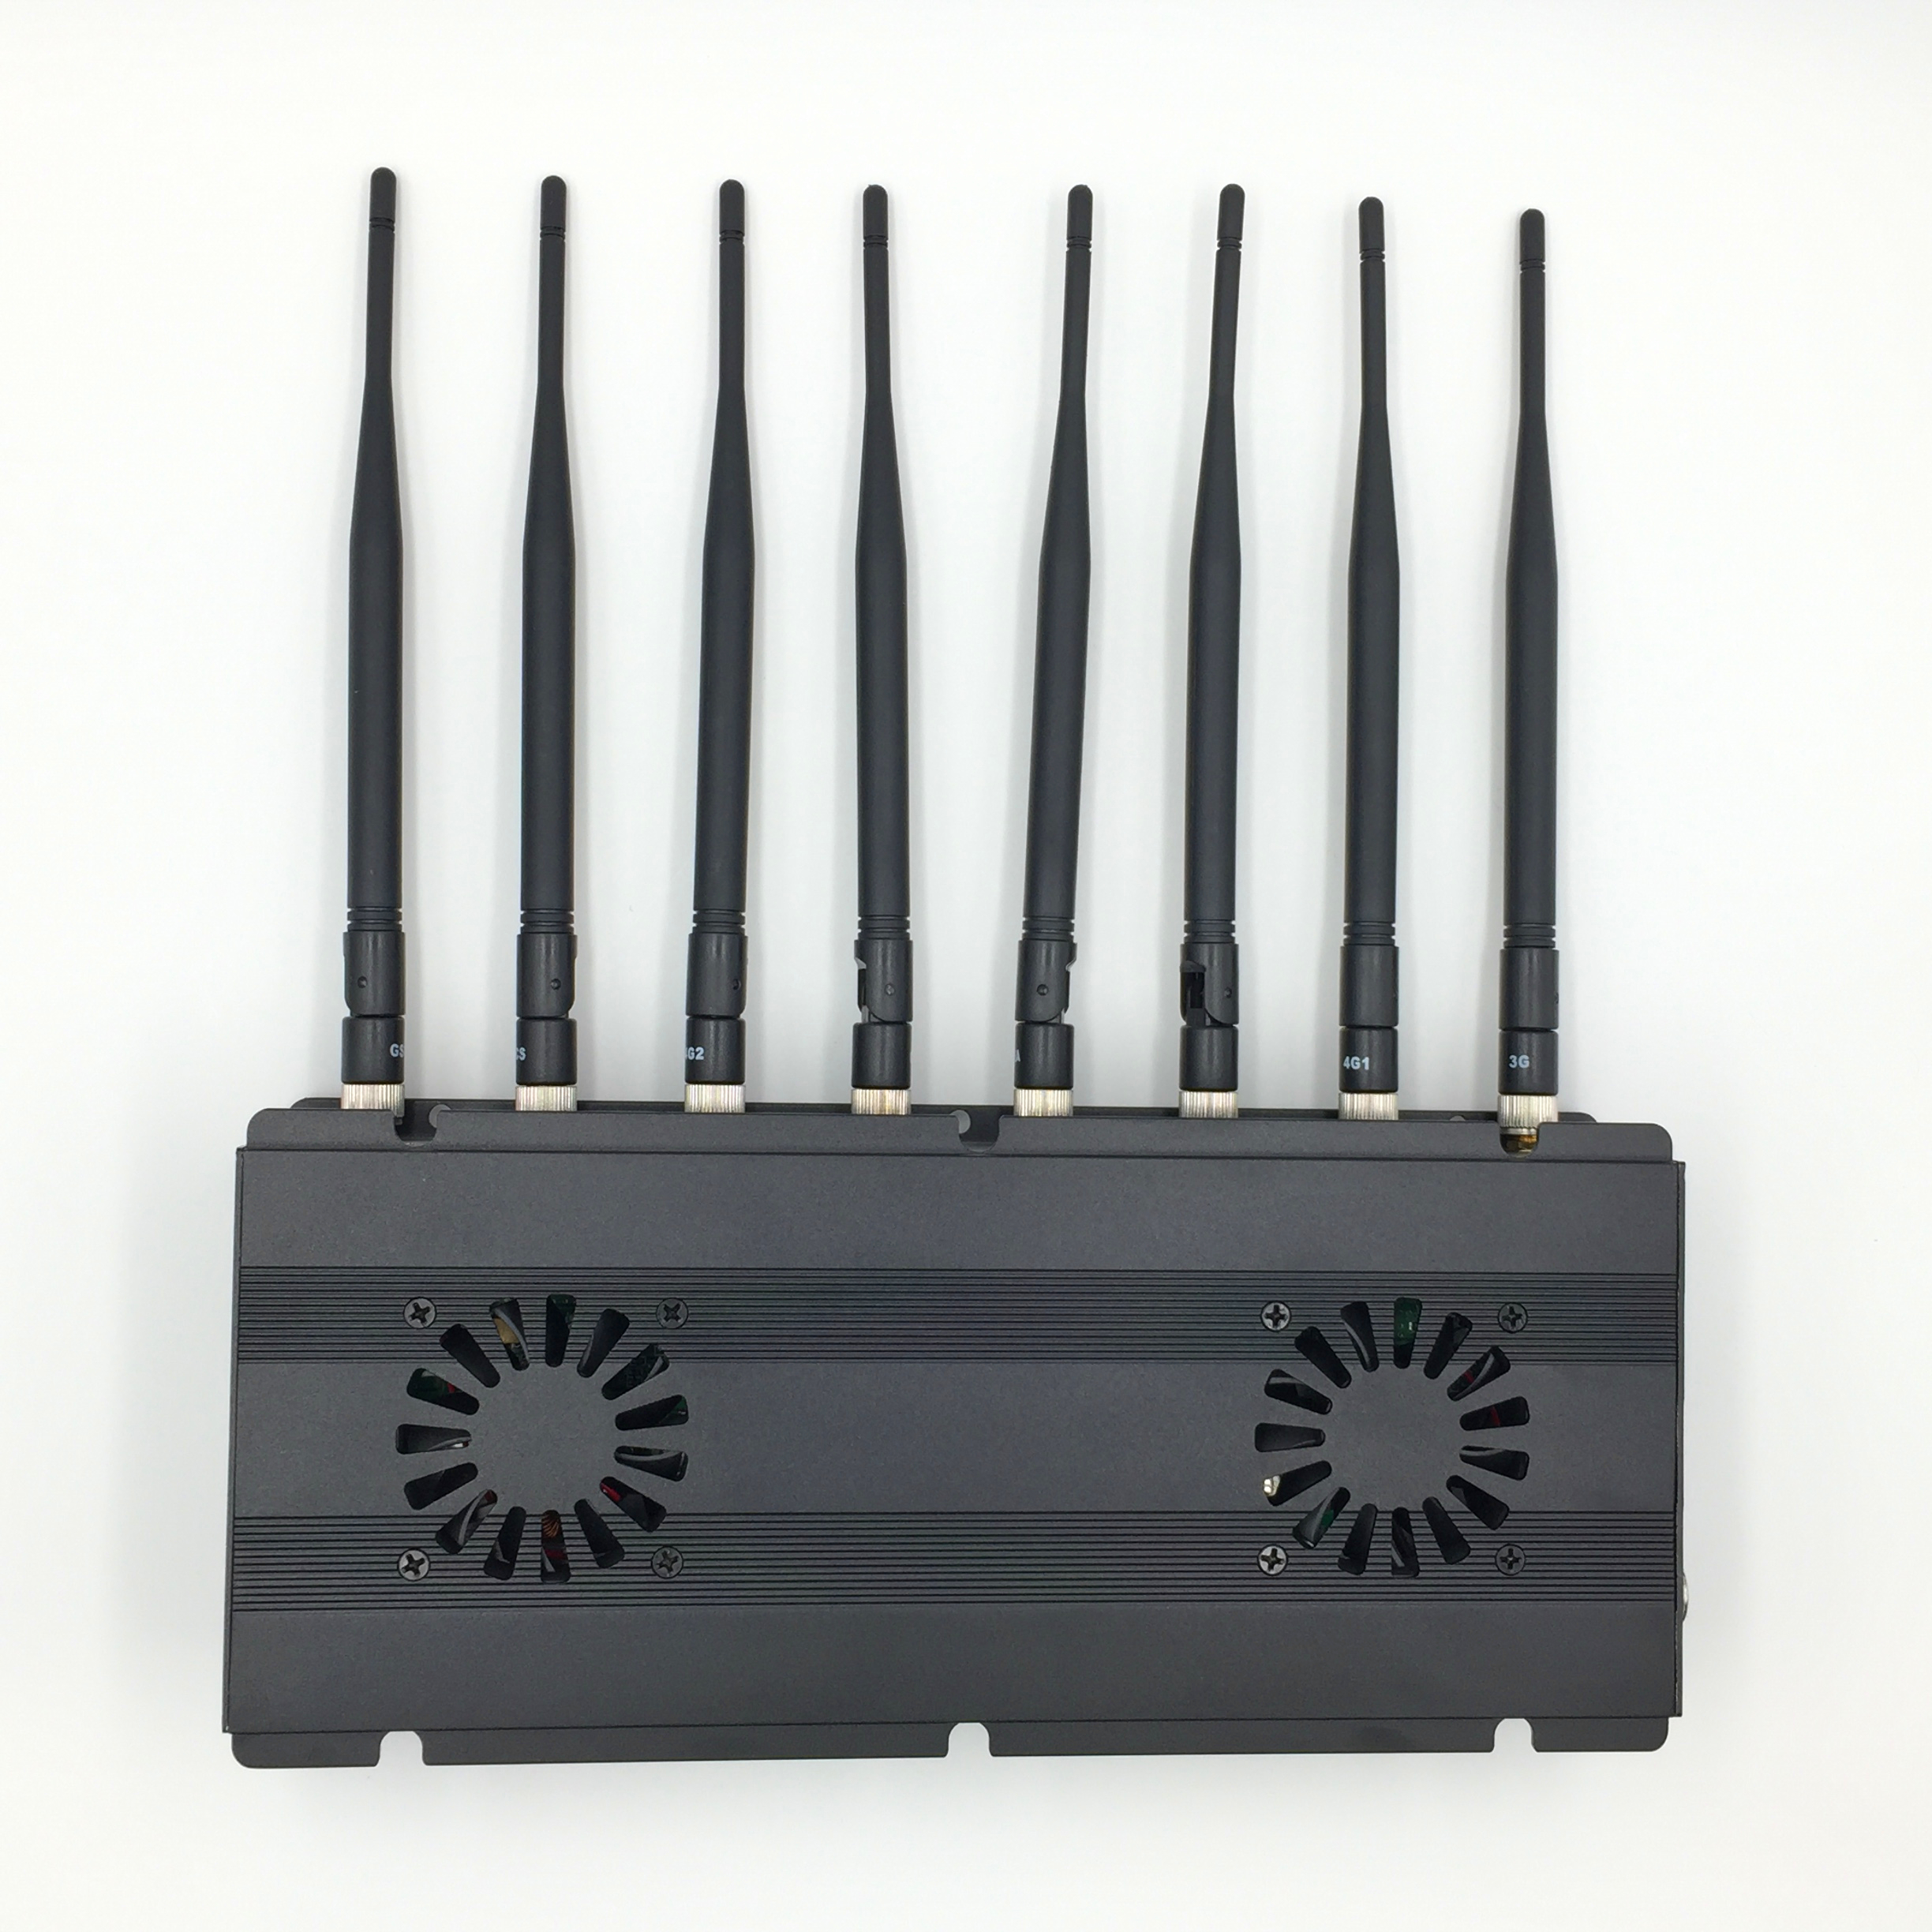 jammer legal office lackland , Black Desktop 8 Antenna Signal Jammers With GSM 3G 4G GPS WiFi LOJACK